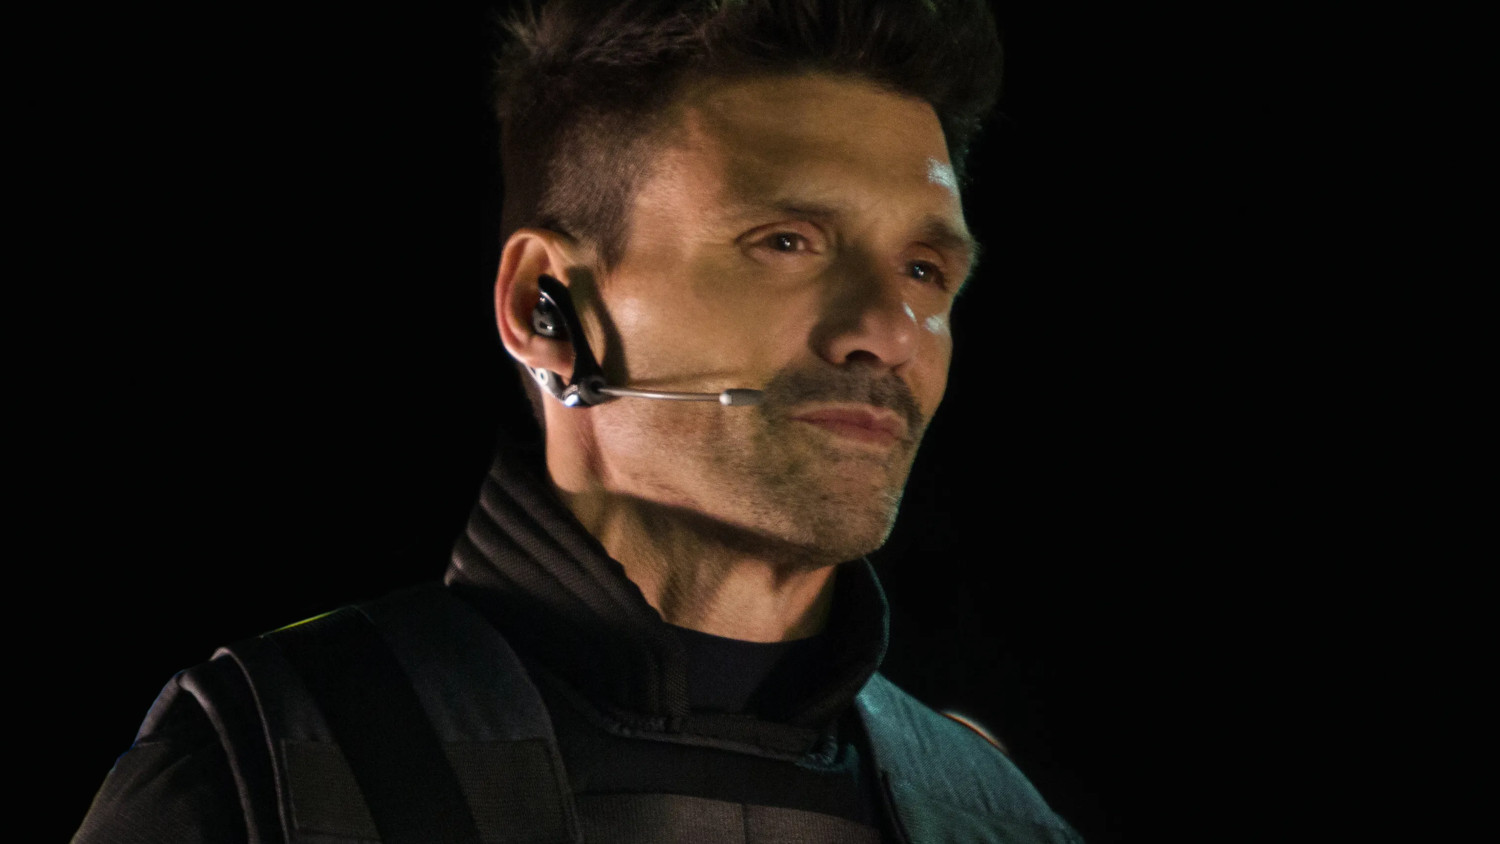 superman cleveland set frank grillo authority spoiler character